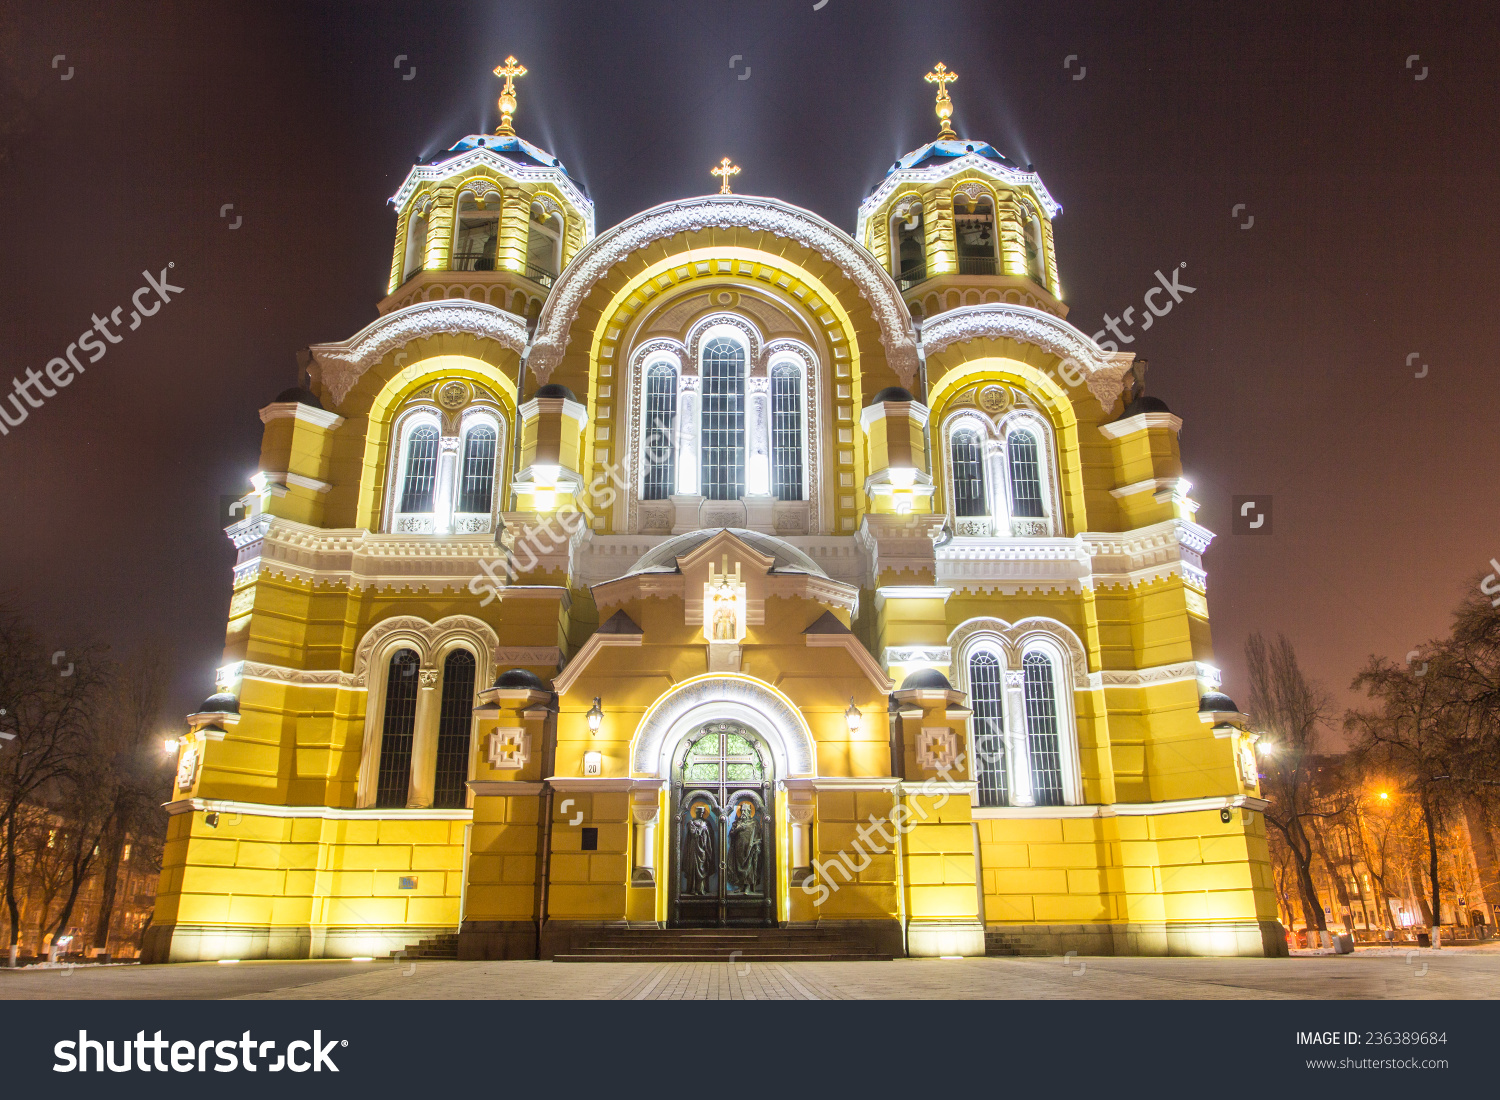 St Vladimir Cathedral Or Volodymyrsky Cathedral Stock Photo.